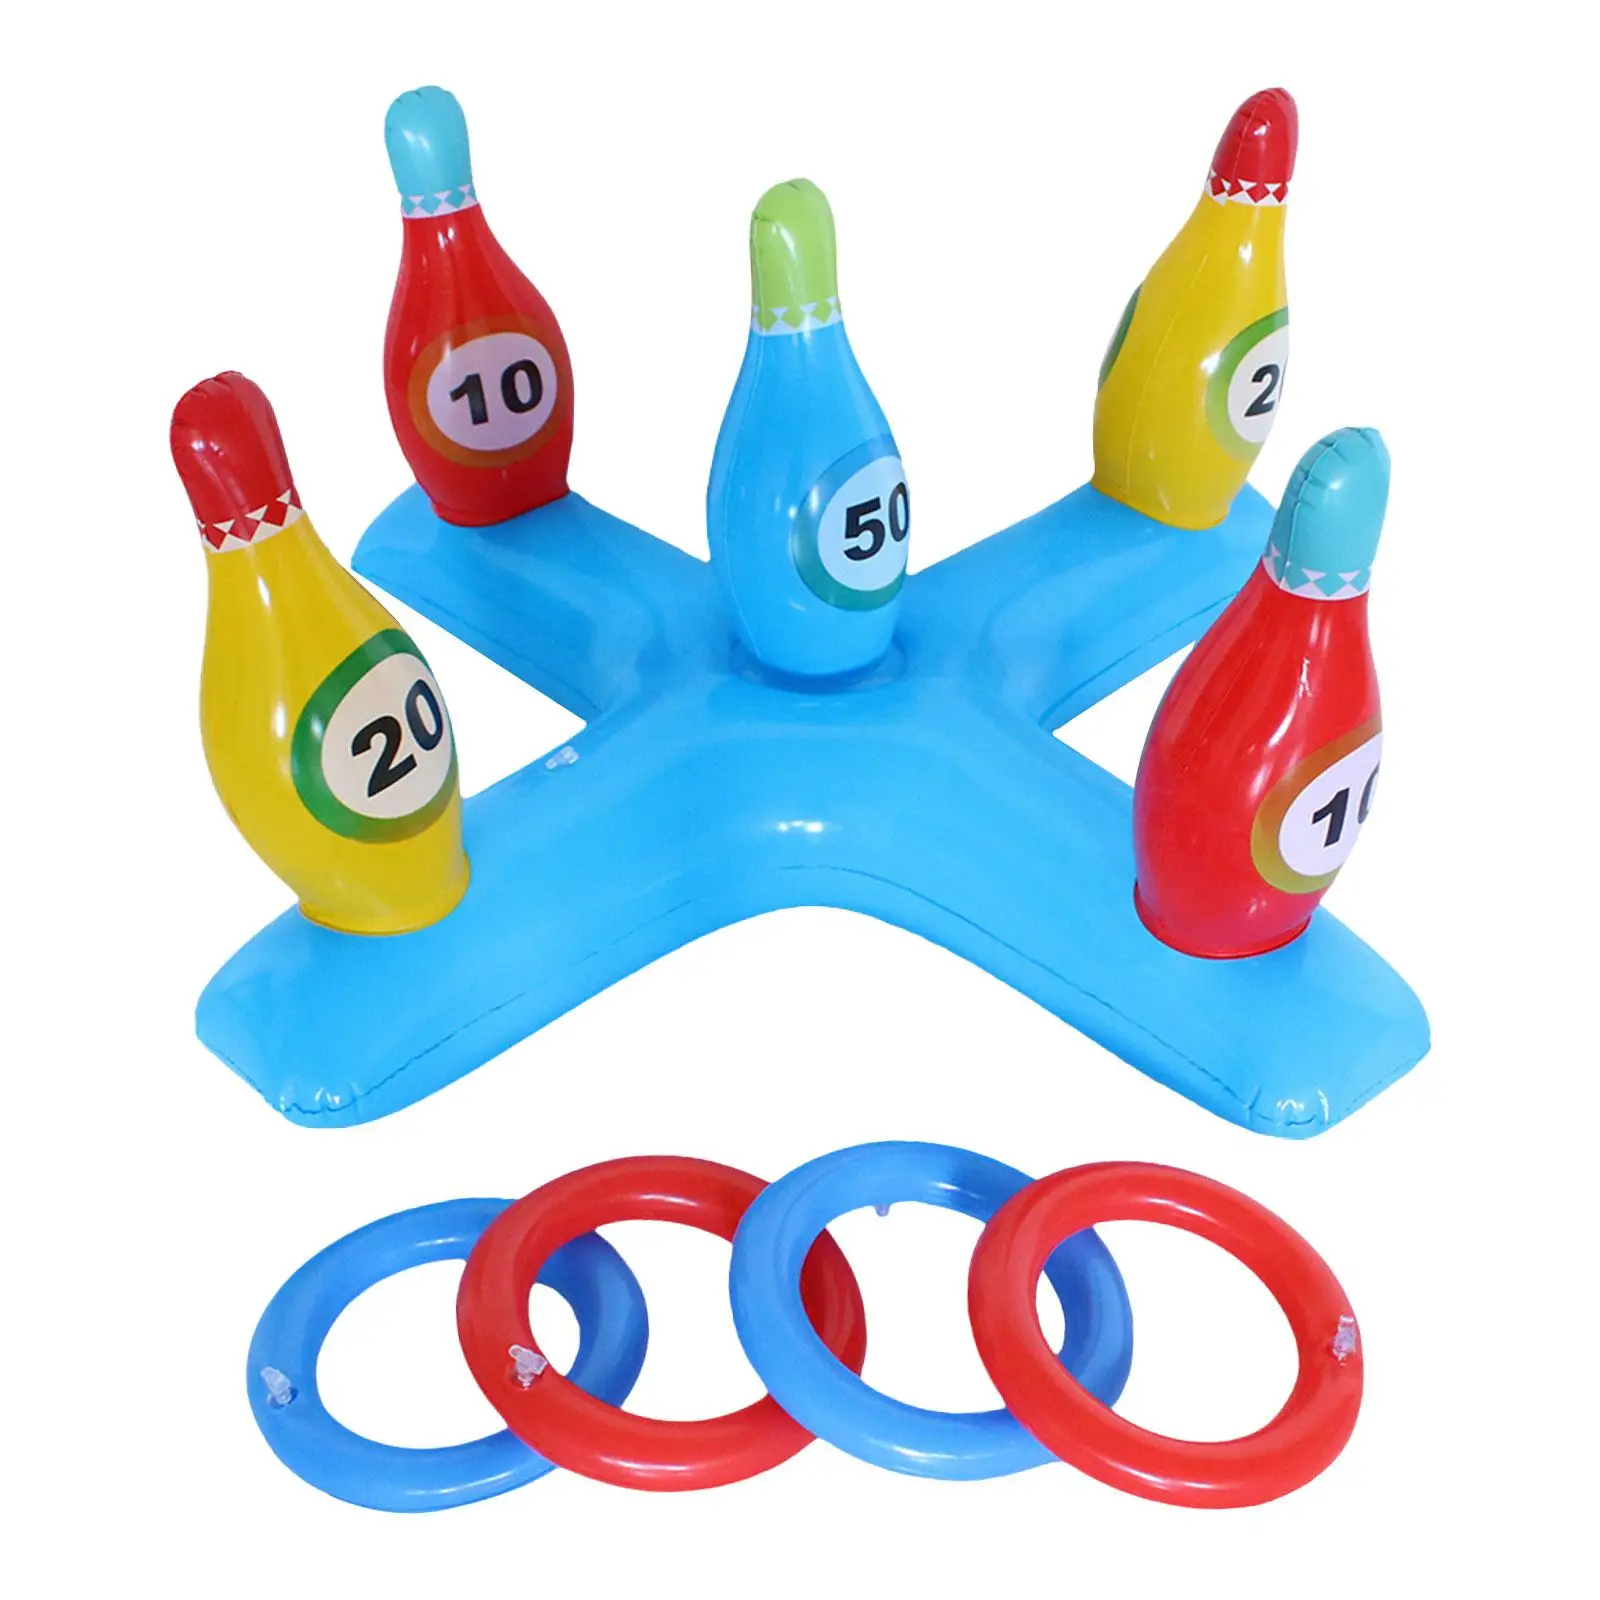 Ring Toss Games Set Outdoor Yard Game Indoor Holiday Fun Sport Carnival Outdoor Games for Games Party Xmas Activity Children